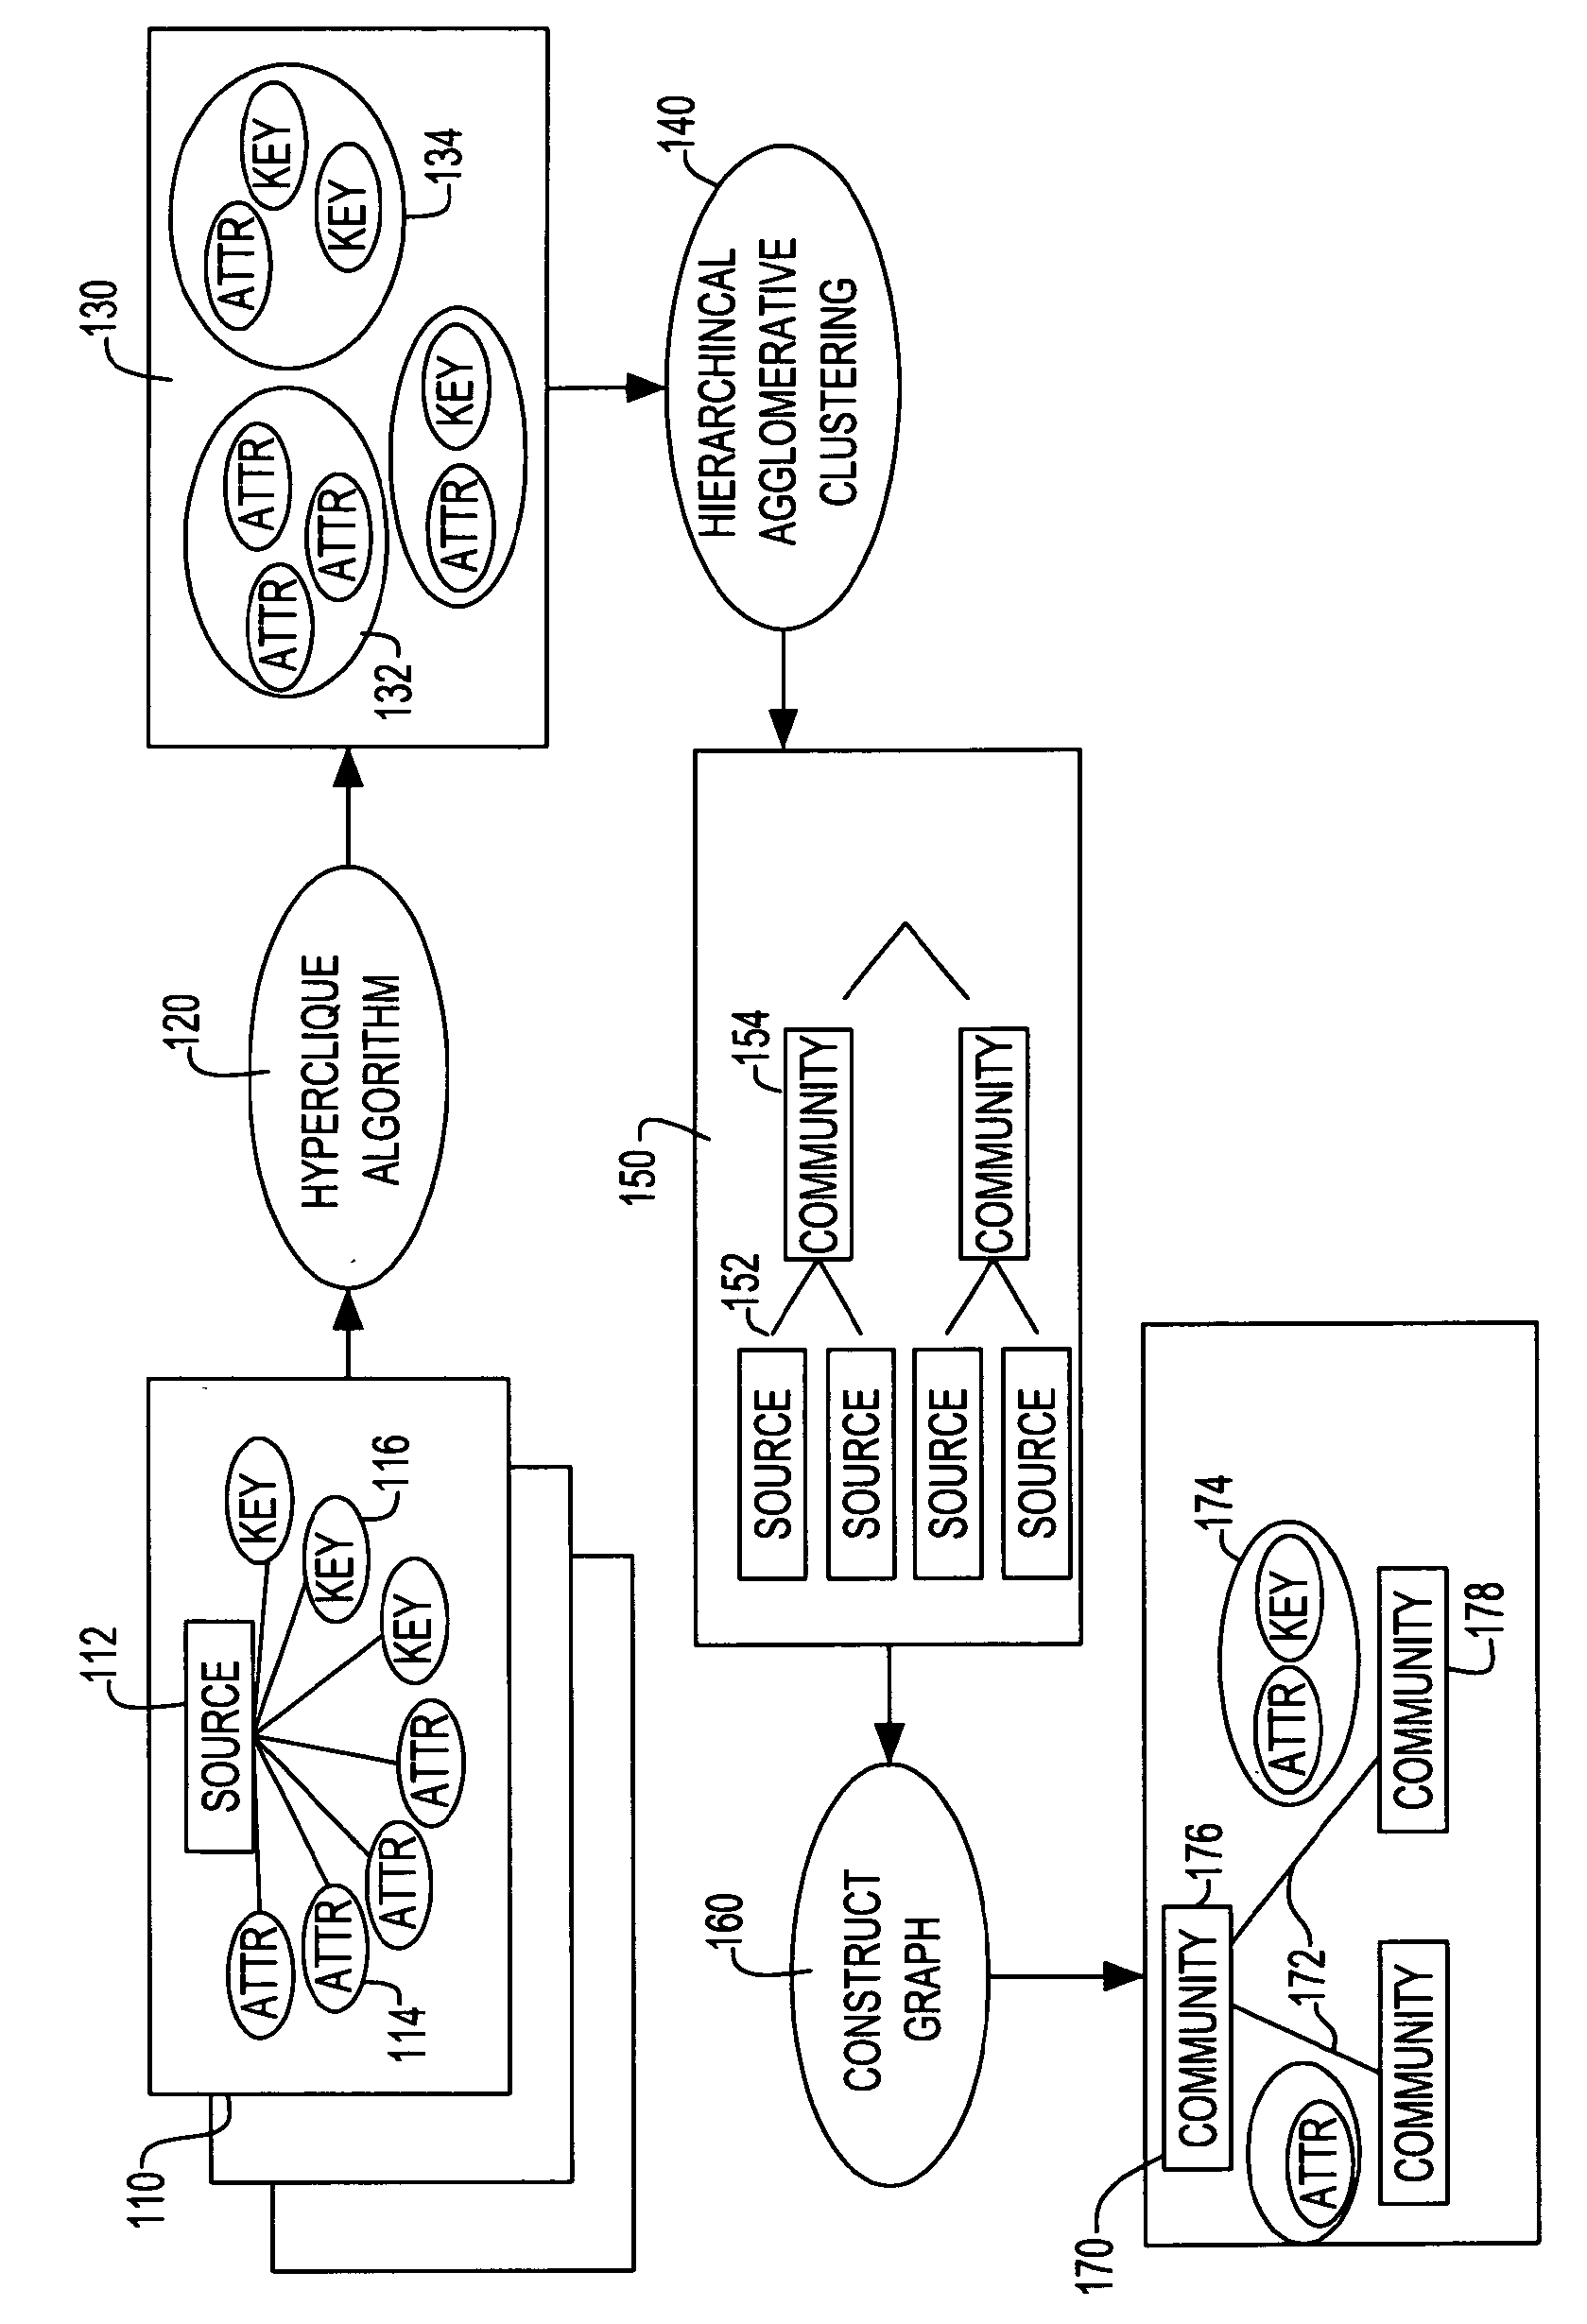 Method and apparatus for organizing data sources